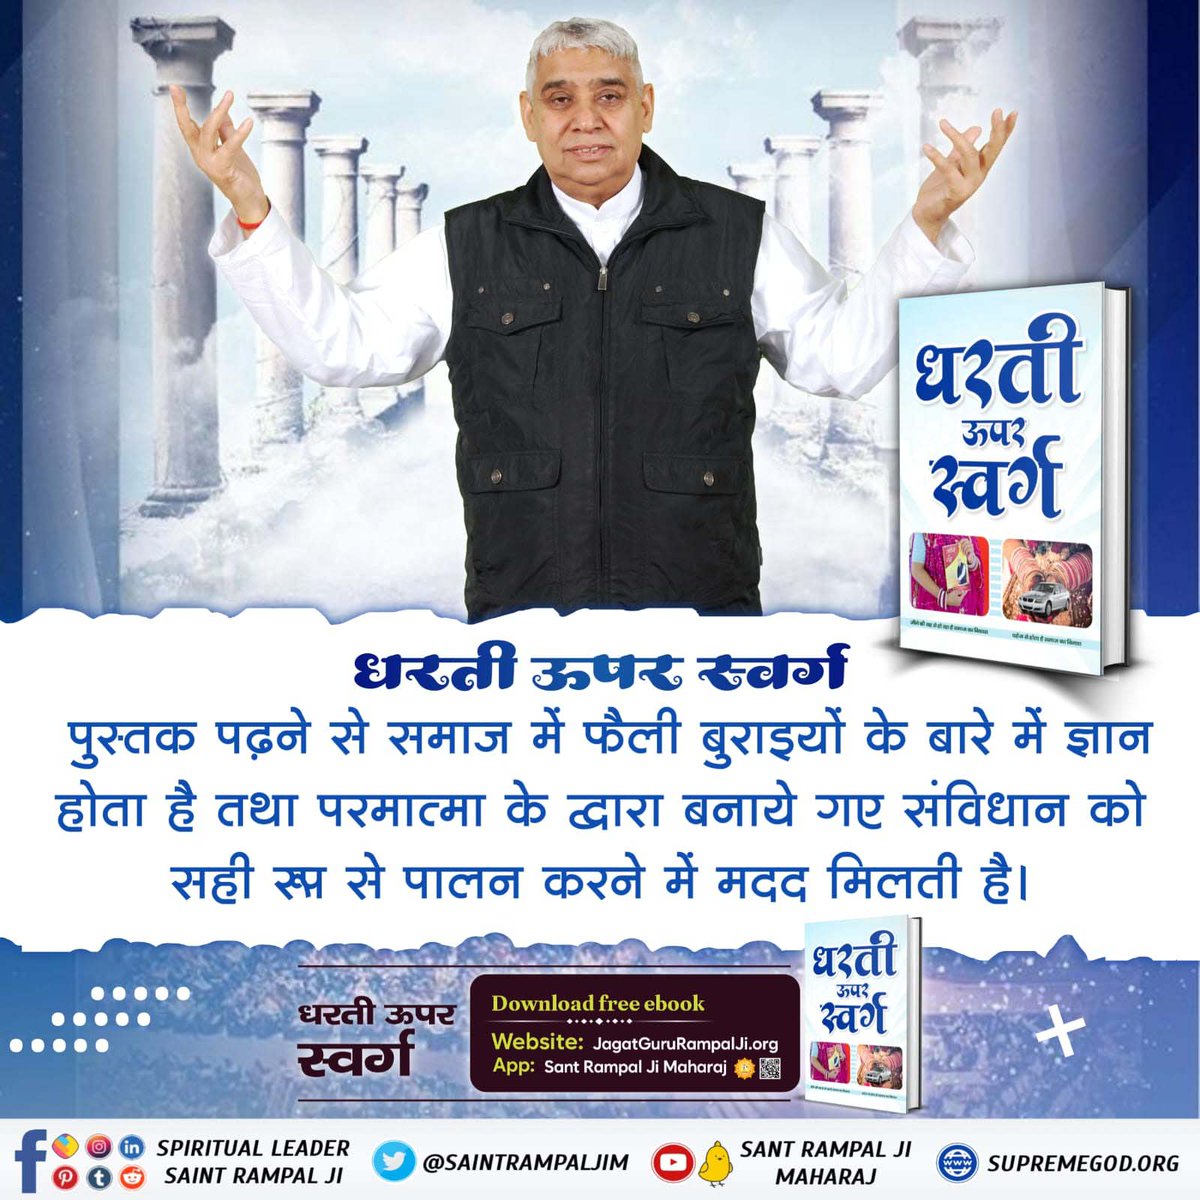 #GodMorningTuesday
The cases of rape, molestation and dowry harassment on daughters and sisters which are increasing day by day, come to an end with the philosophy of Sant Rampal Ji Maharaj (which is explained as per the constitution of God).
#धरती_को_स्वर्ग_बनाना_है